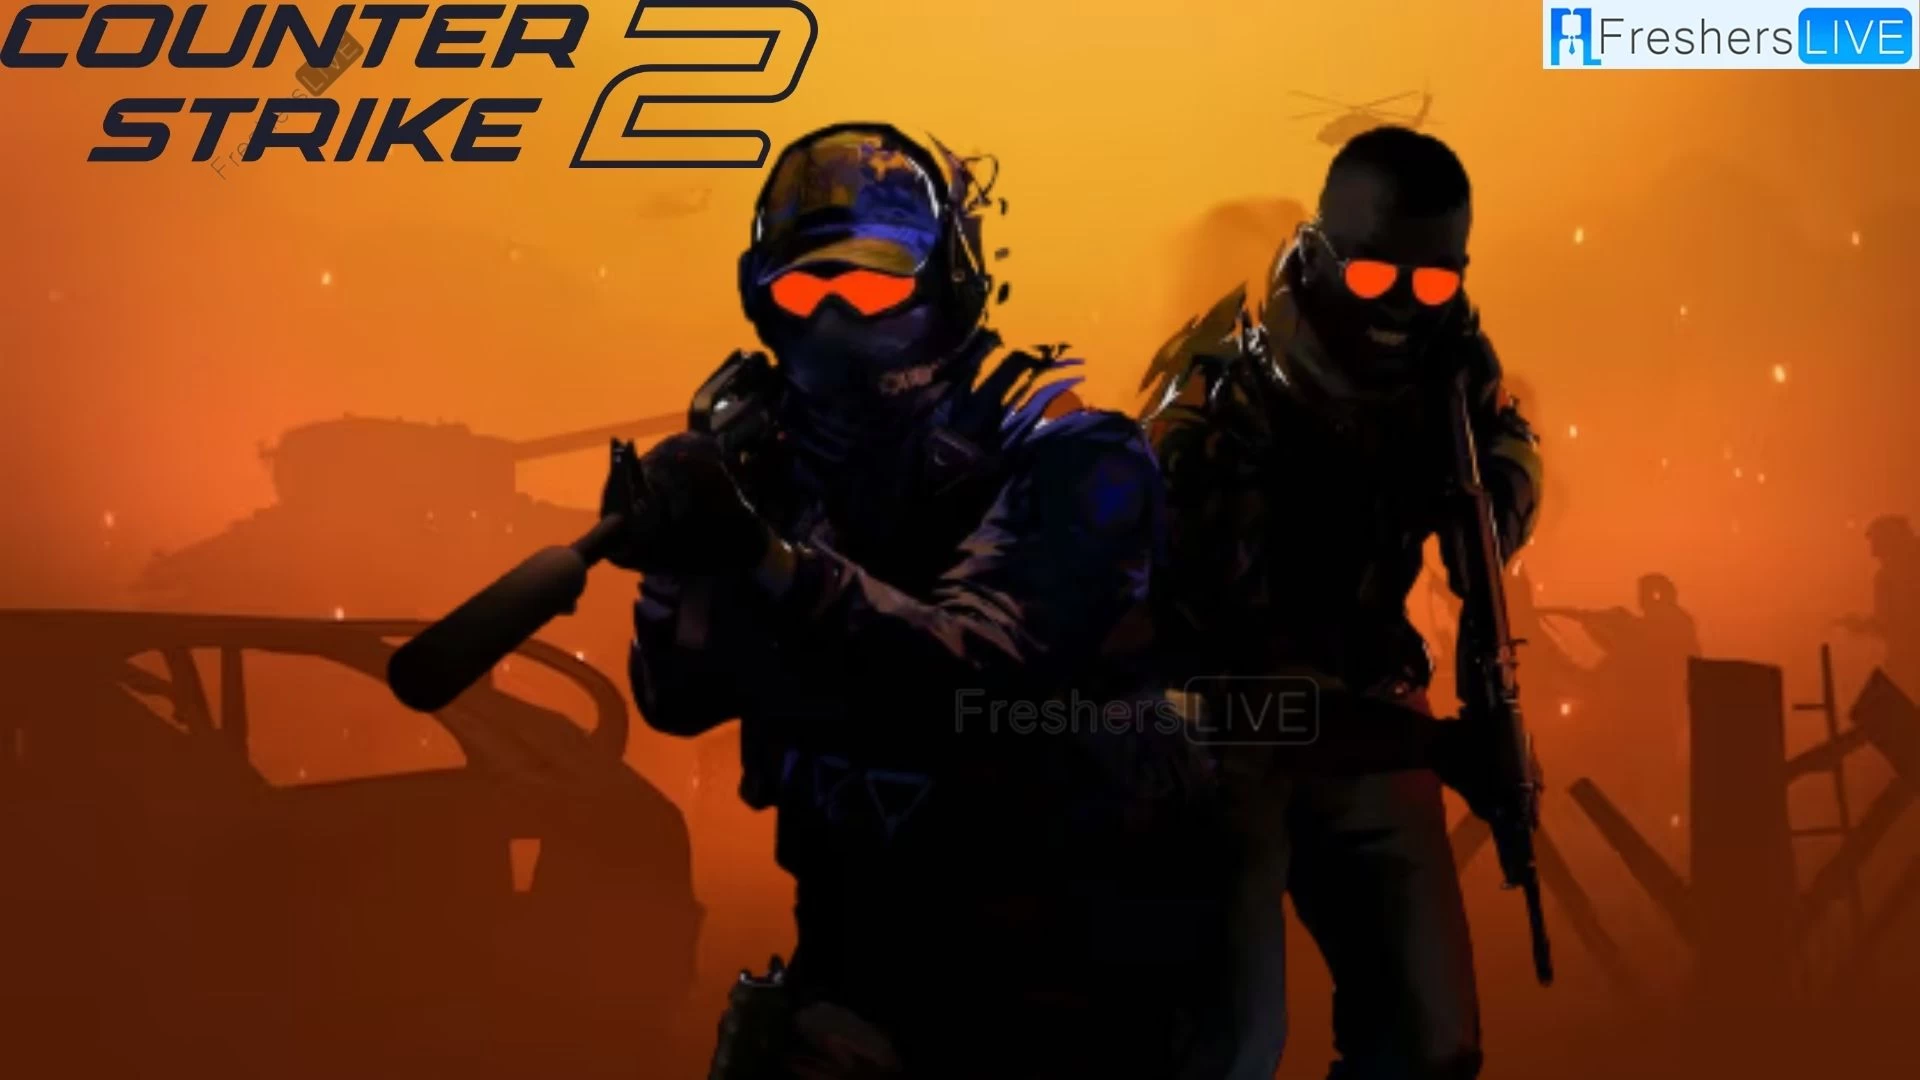 How to Report Hackers in Counter-Strike 2?